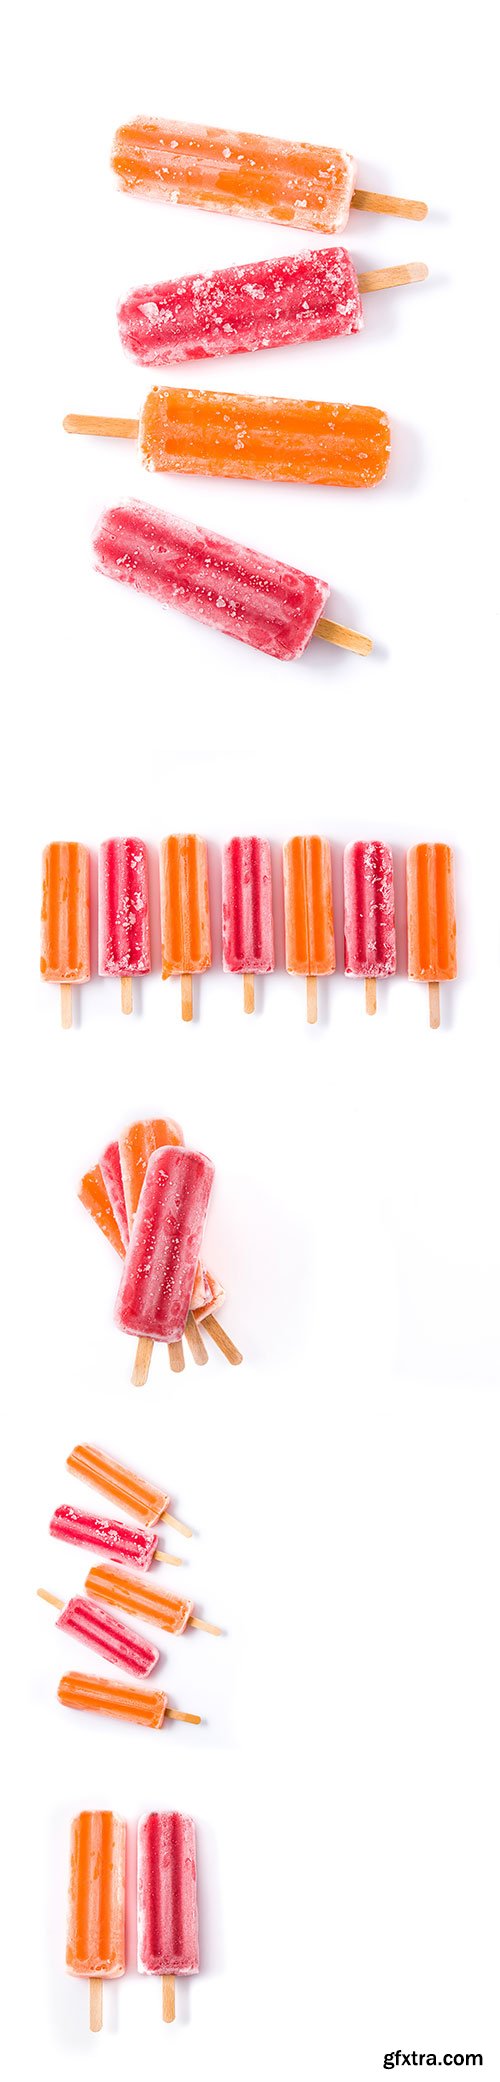 Orange And Strawberry Popsicles Isolated - 7xJPGs